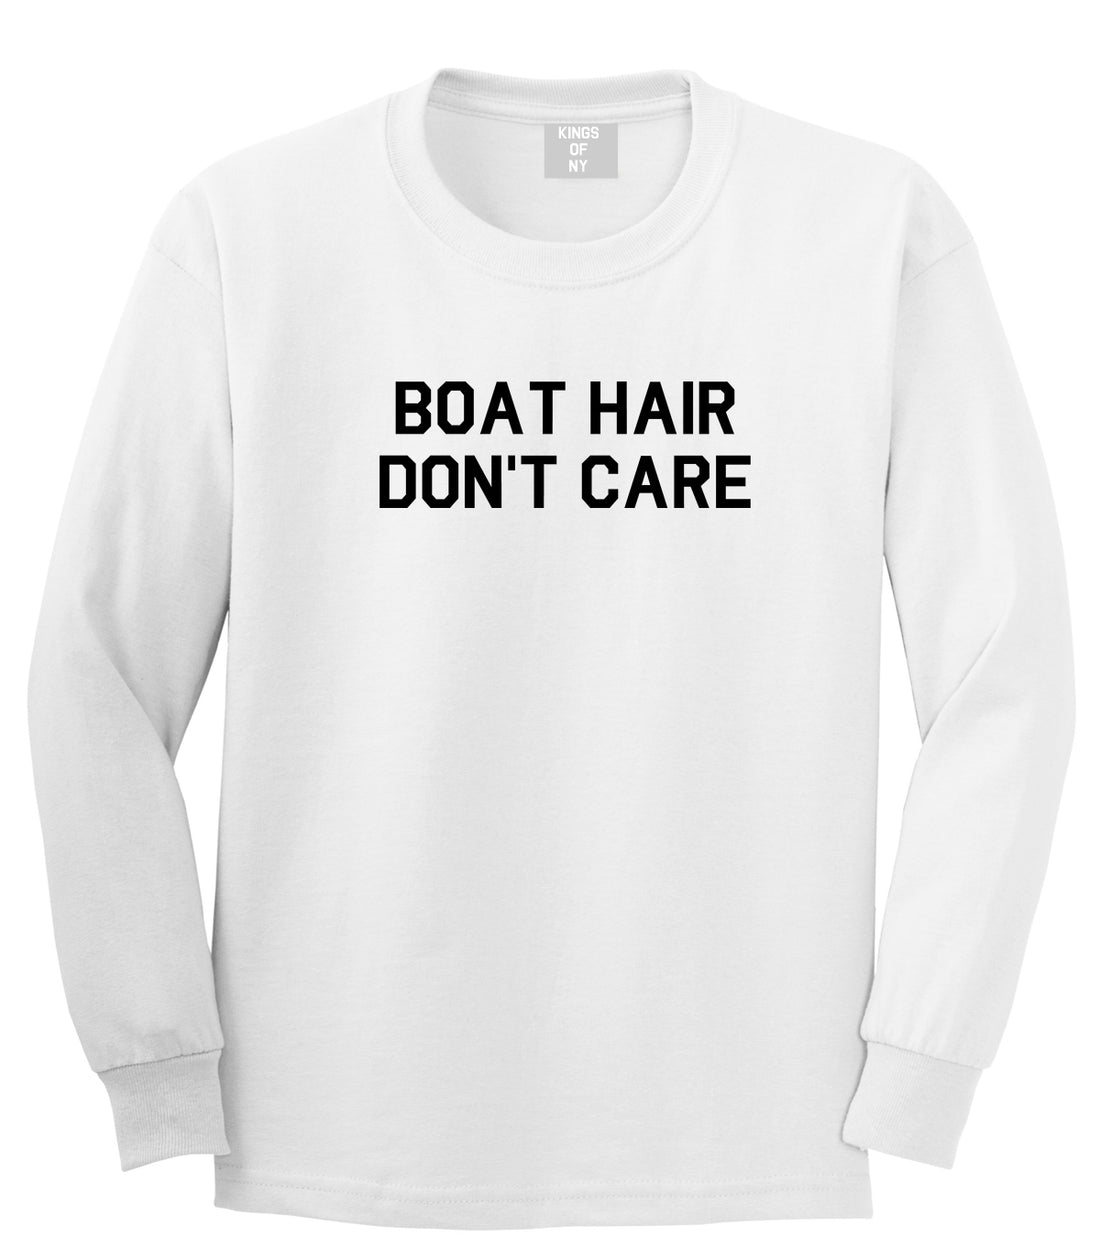 Boat Hair Dont Care White Long Sleeve T-Shirt by Kings Of NY